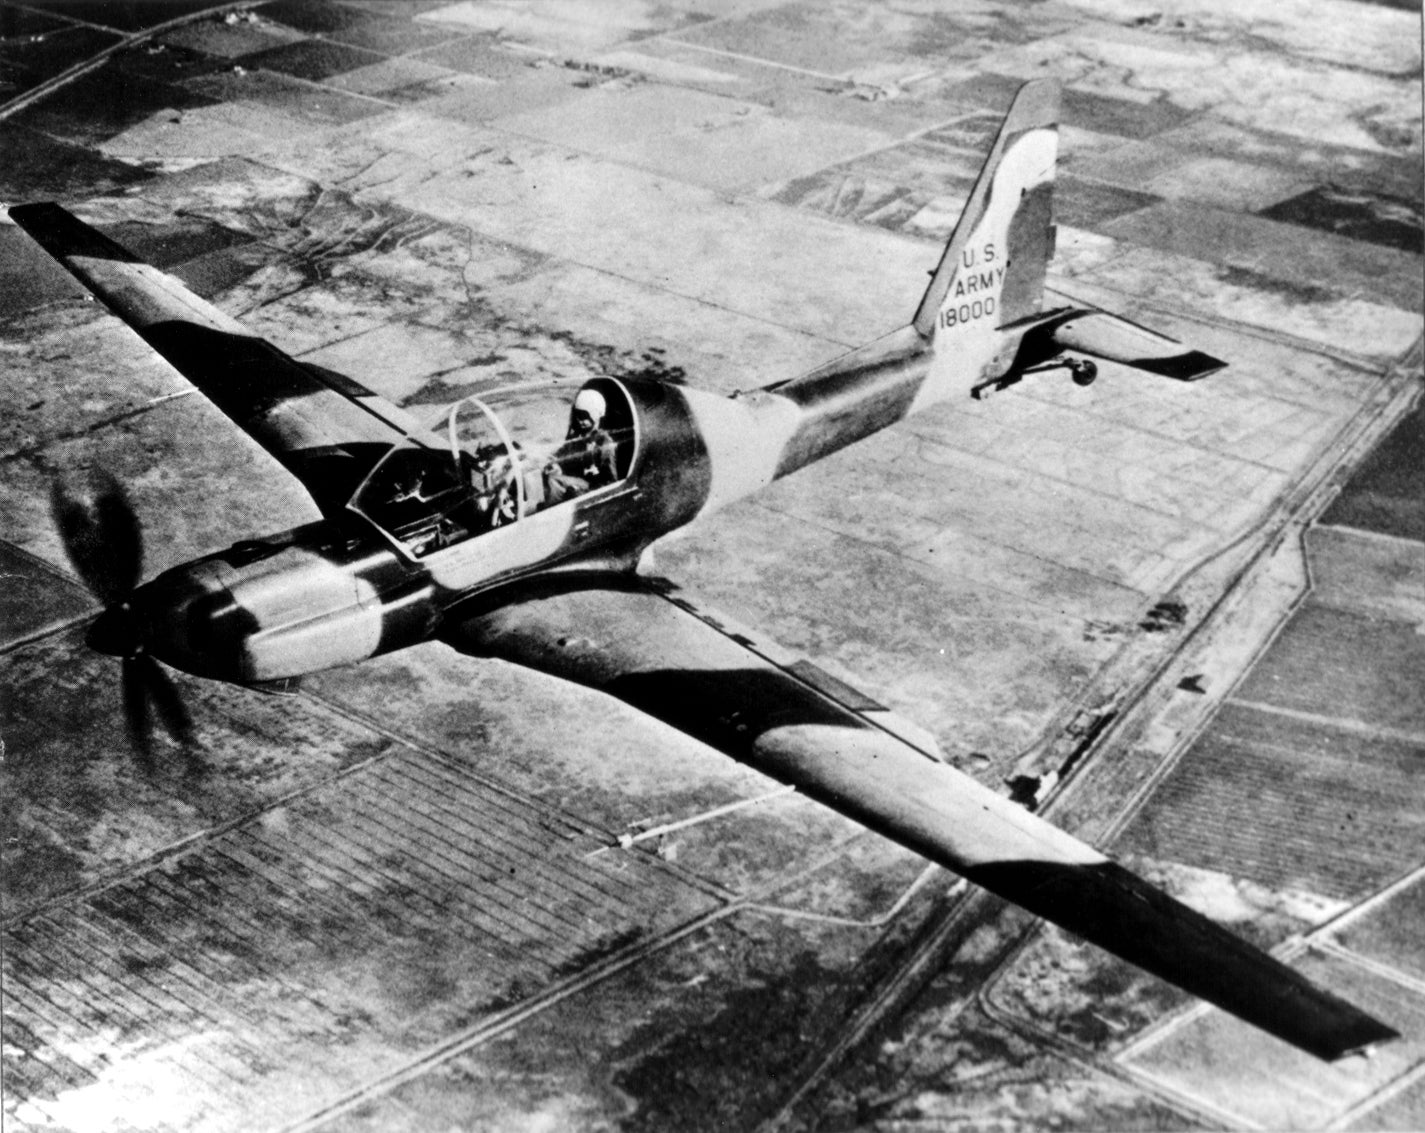 This was one of the stealthiest aircraft ever flown by the US military